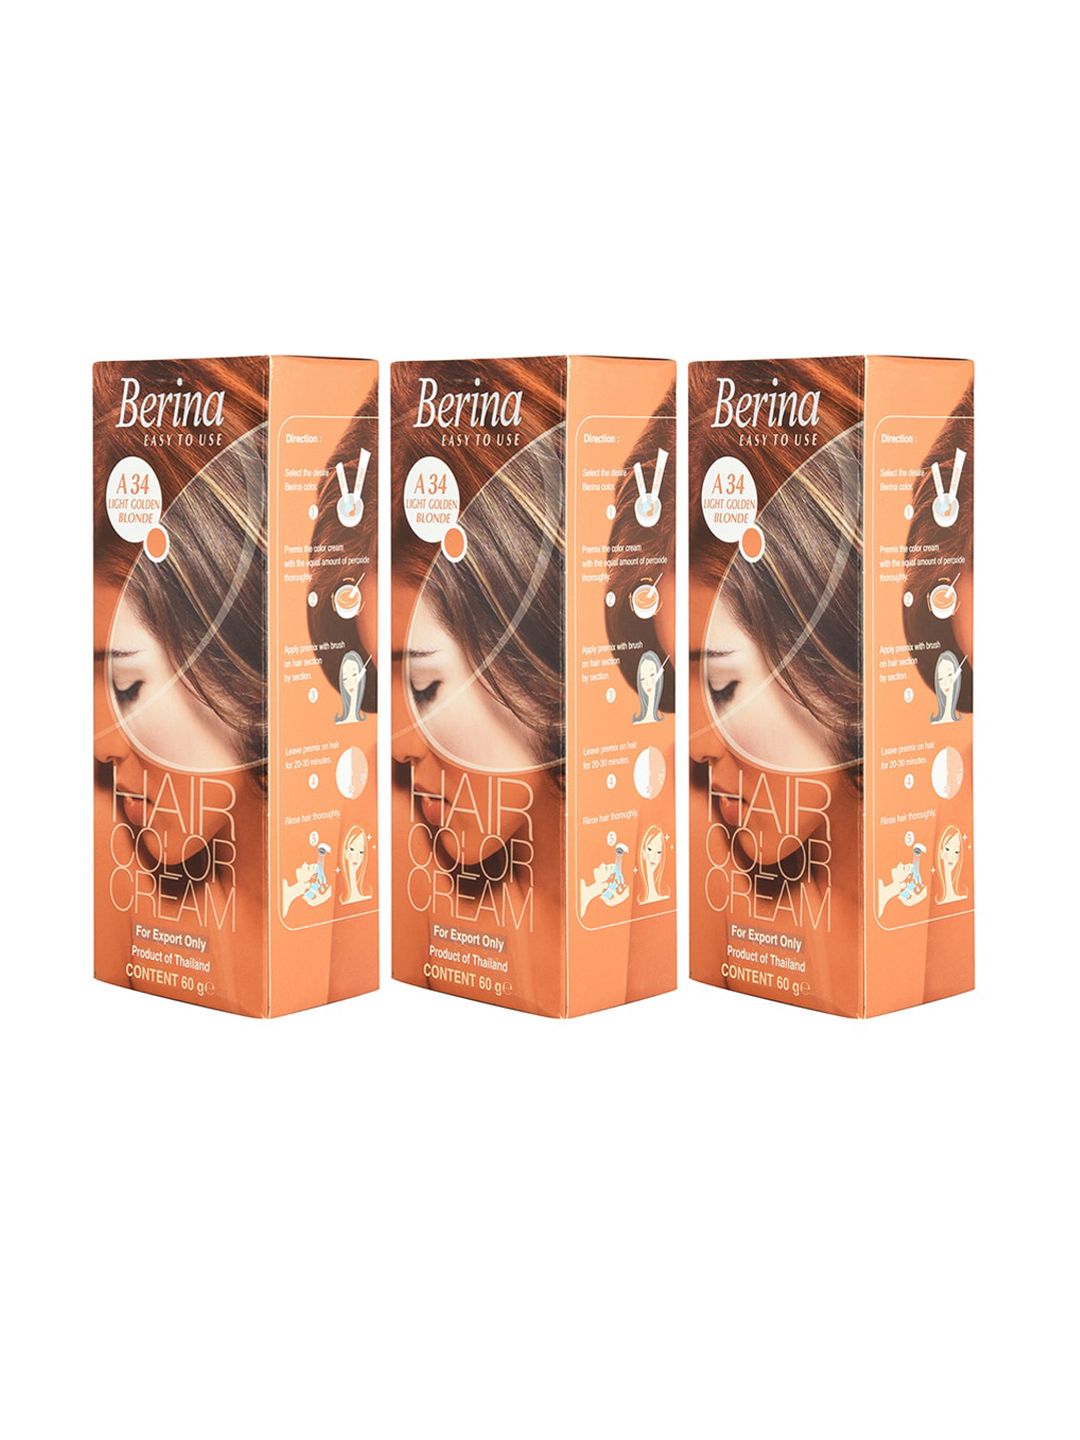 Berina Pack of 3 Hair Color Cream A34 Light Golden Blonde Price in India